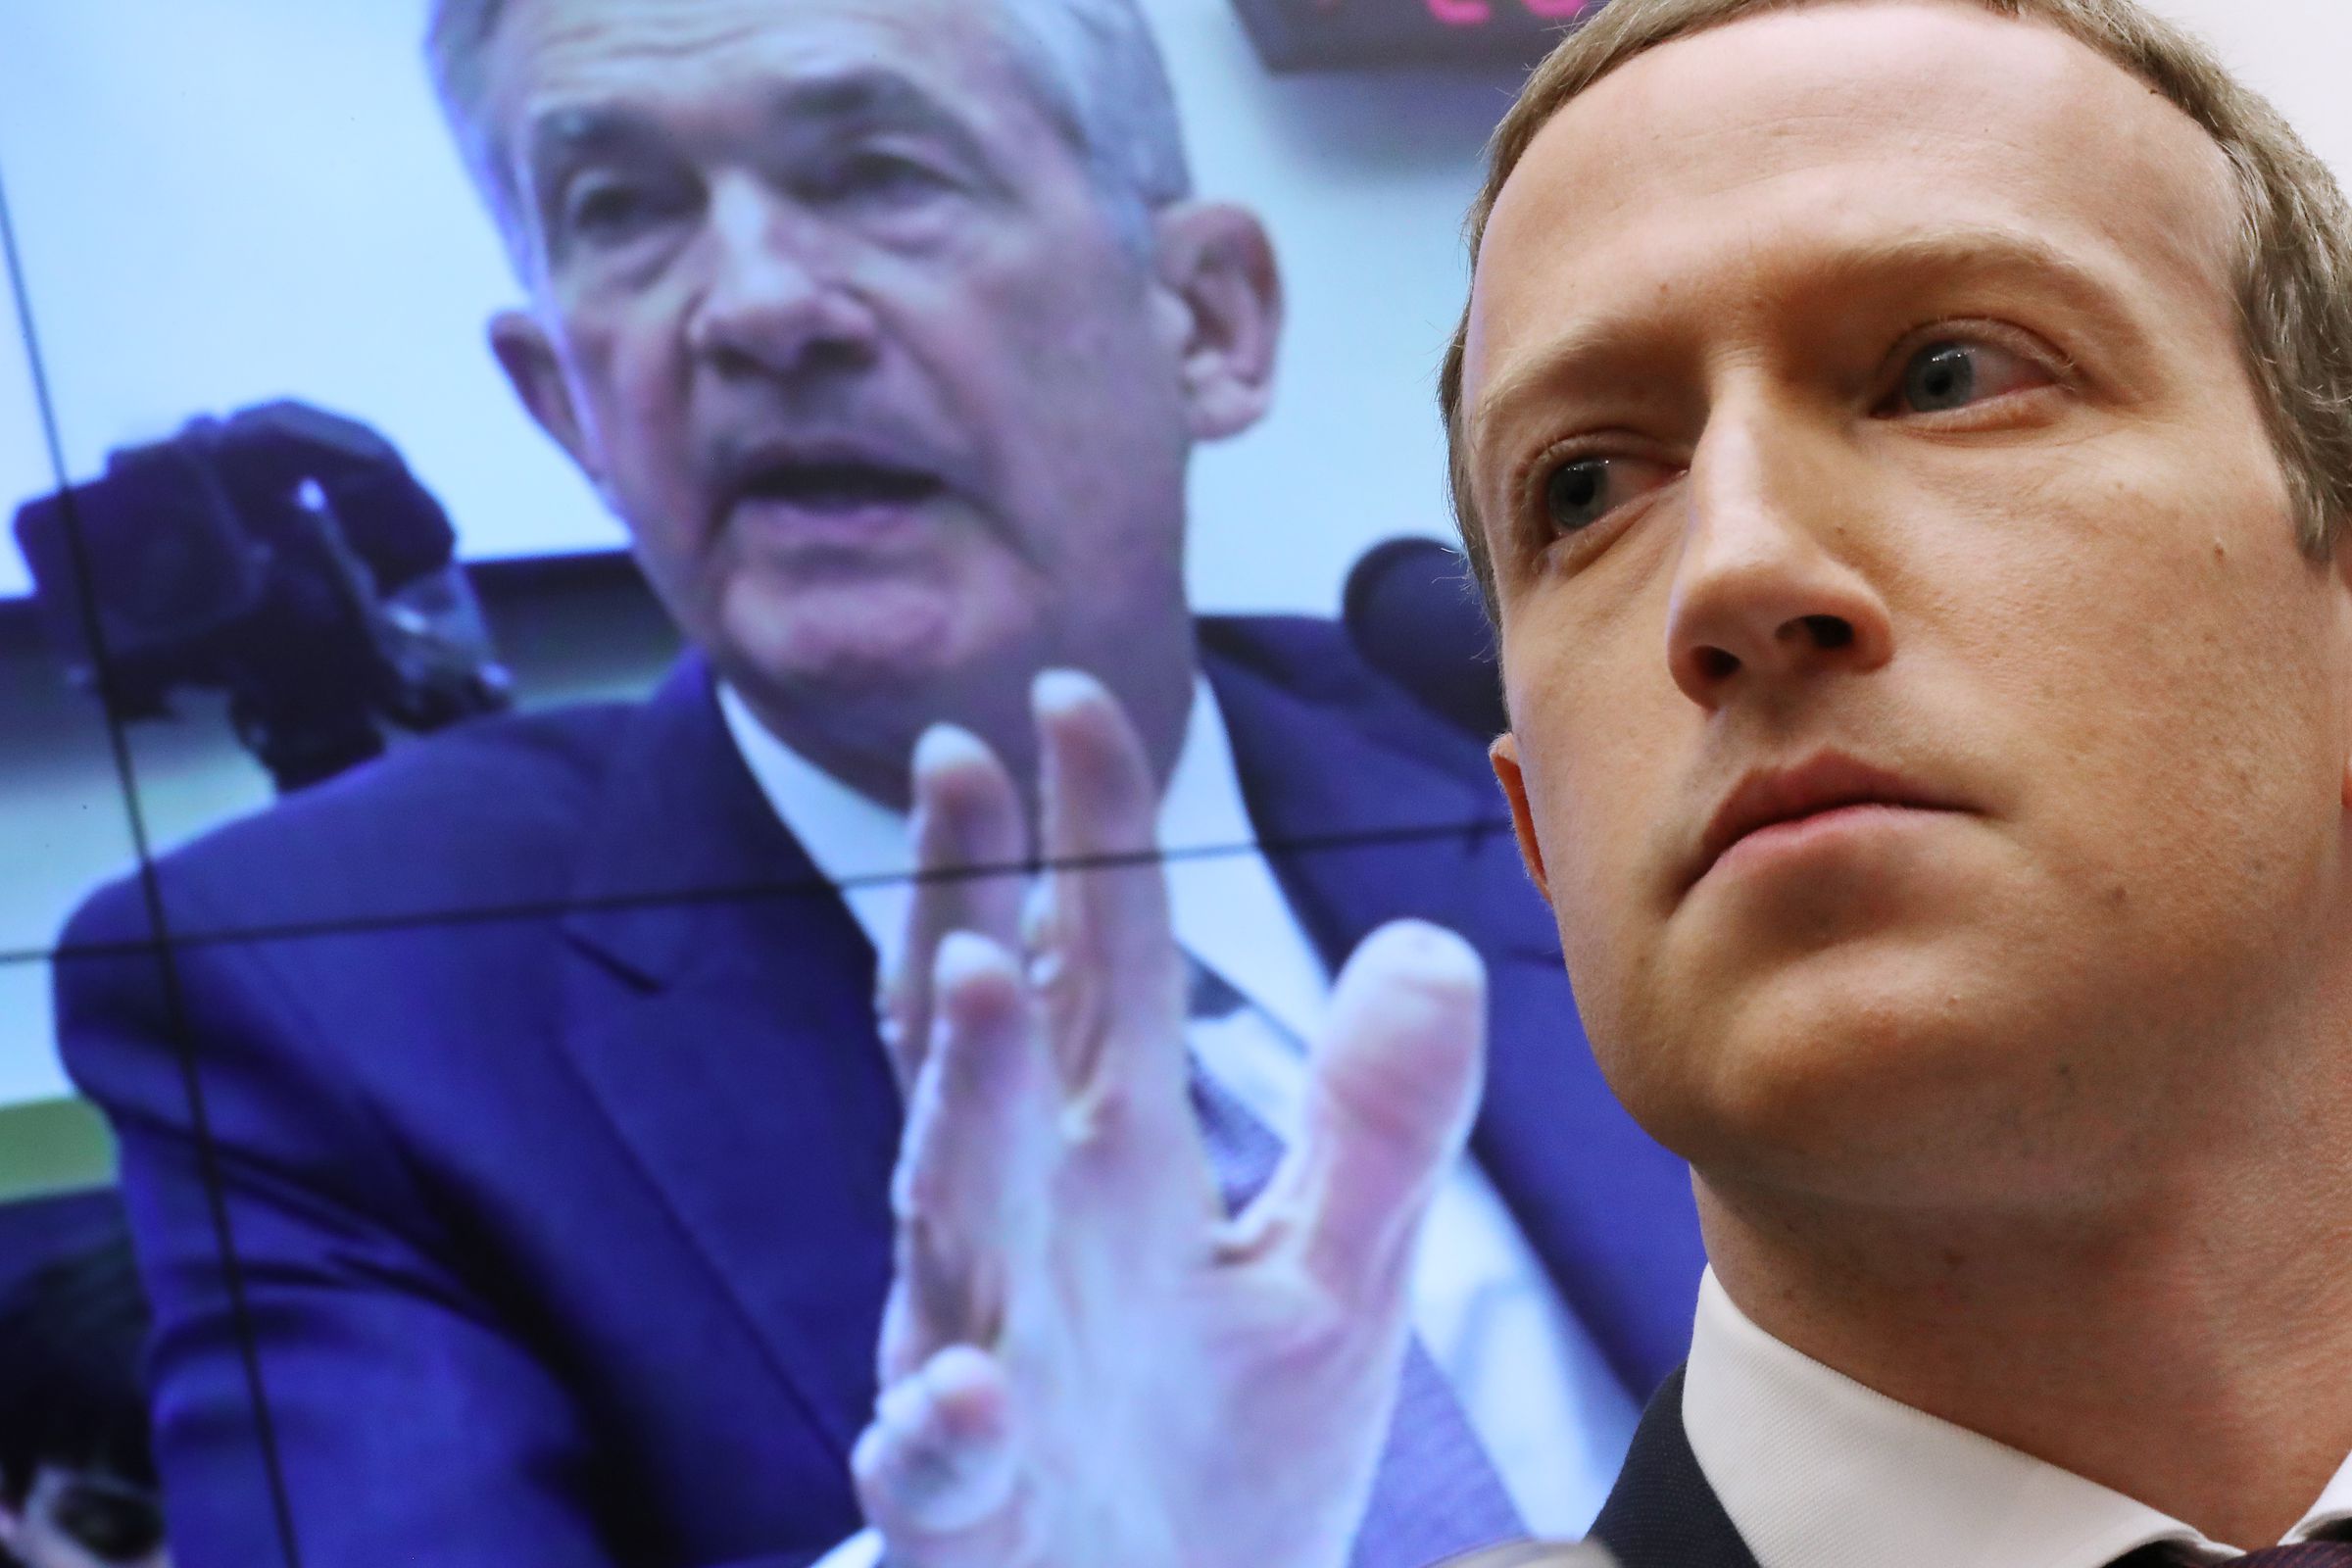 With an image of Federal Reserve Bank Chairman Jerome Powell on a screen in the background, Facebook co-founder and CEO Mark Zuckerberg testifies before the House Financial Services Committee in the Rayburn House Office Building on Capitol Hill October 23, 2019 in Washington, DC.